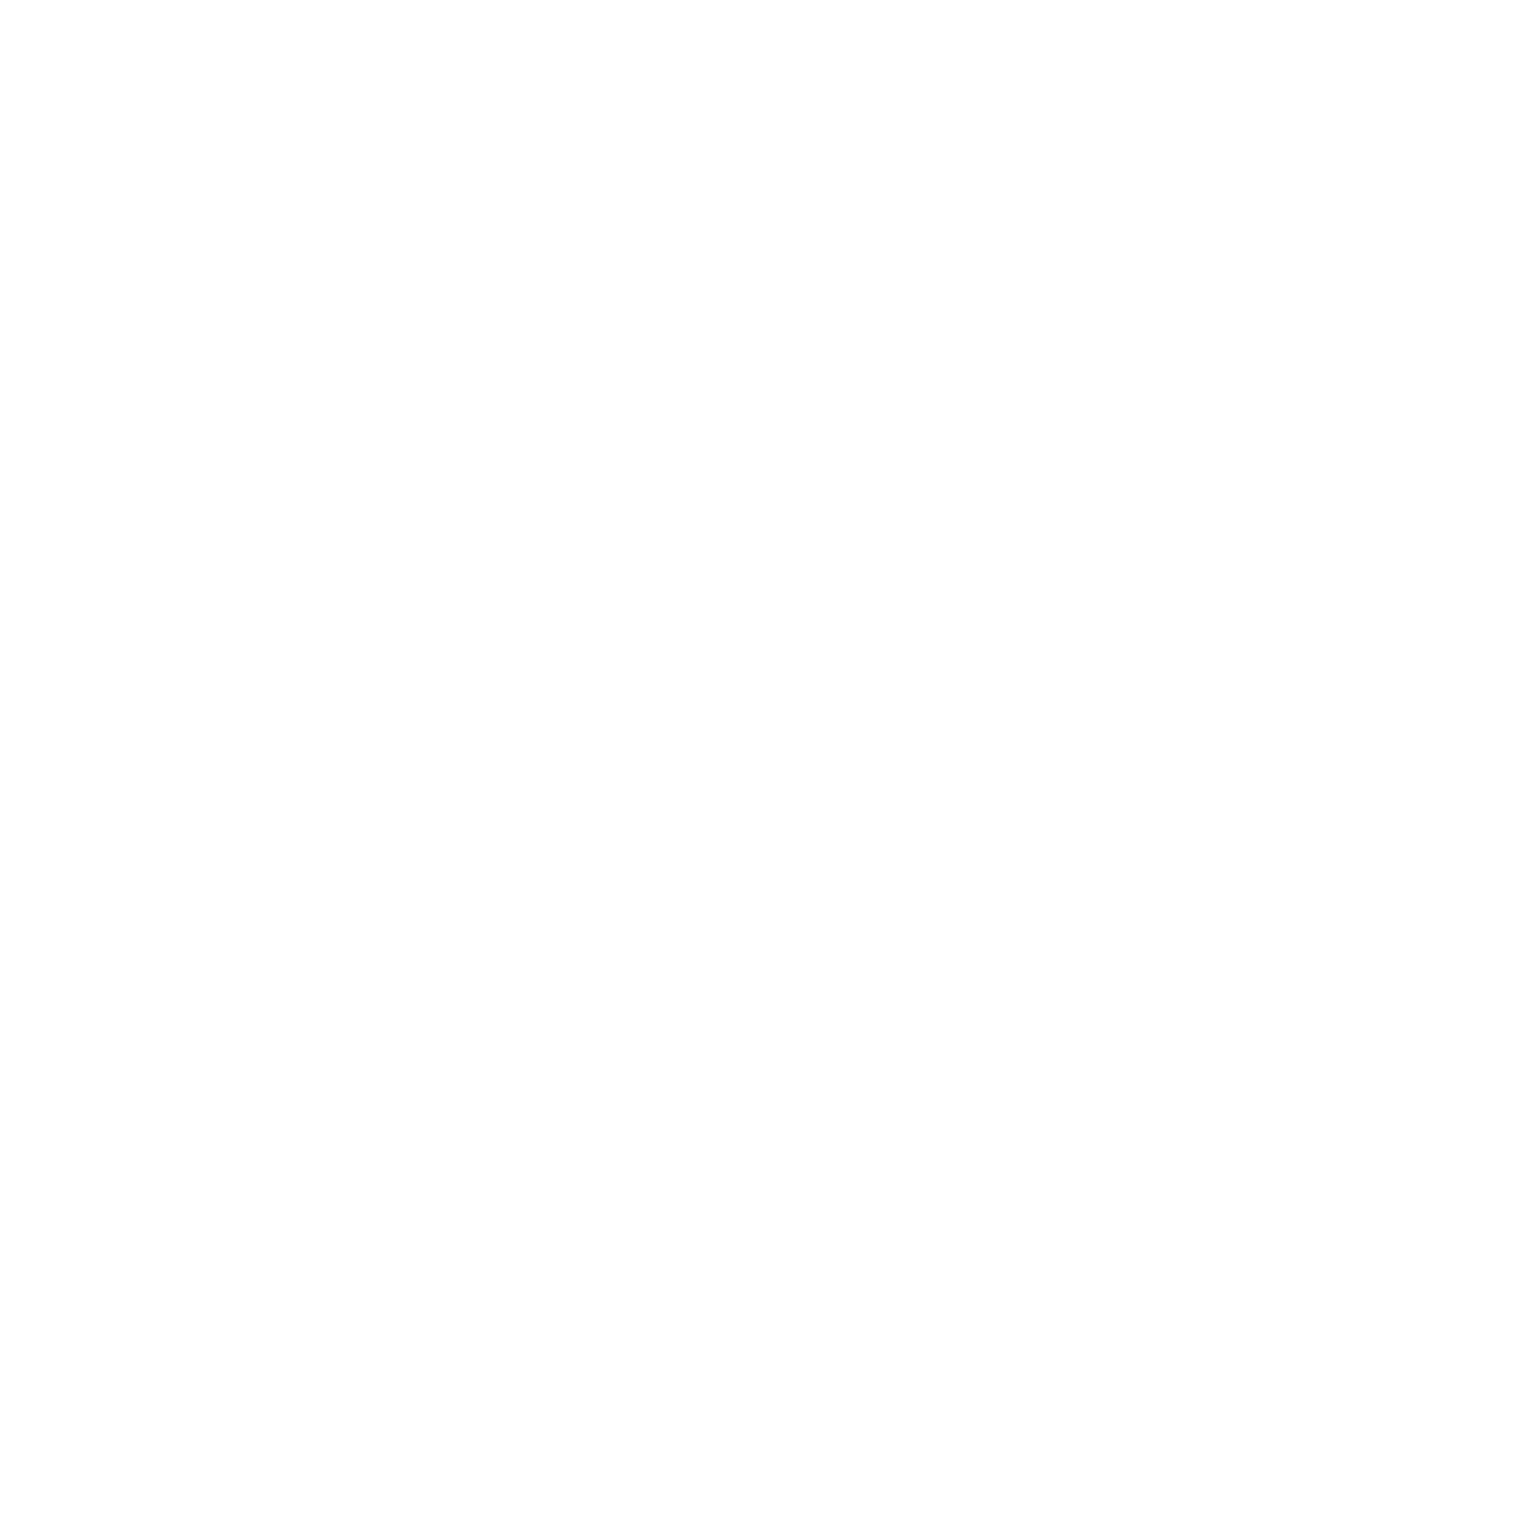 JP THE WAVY | The official website